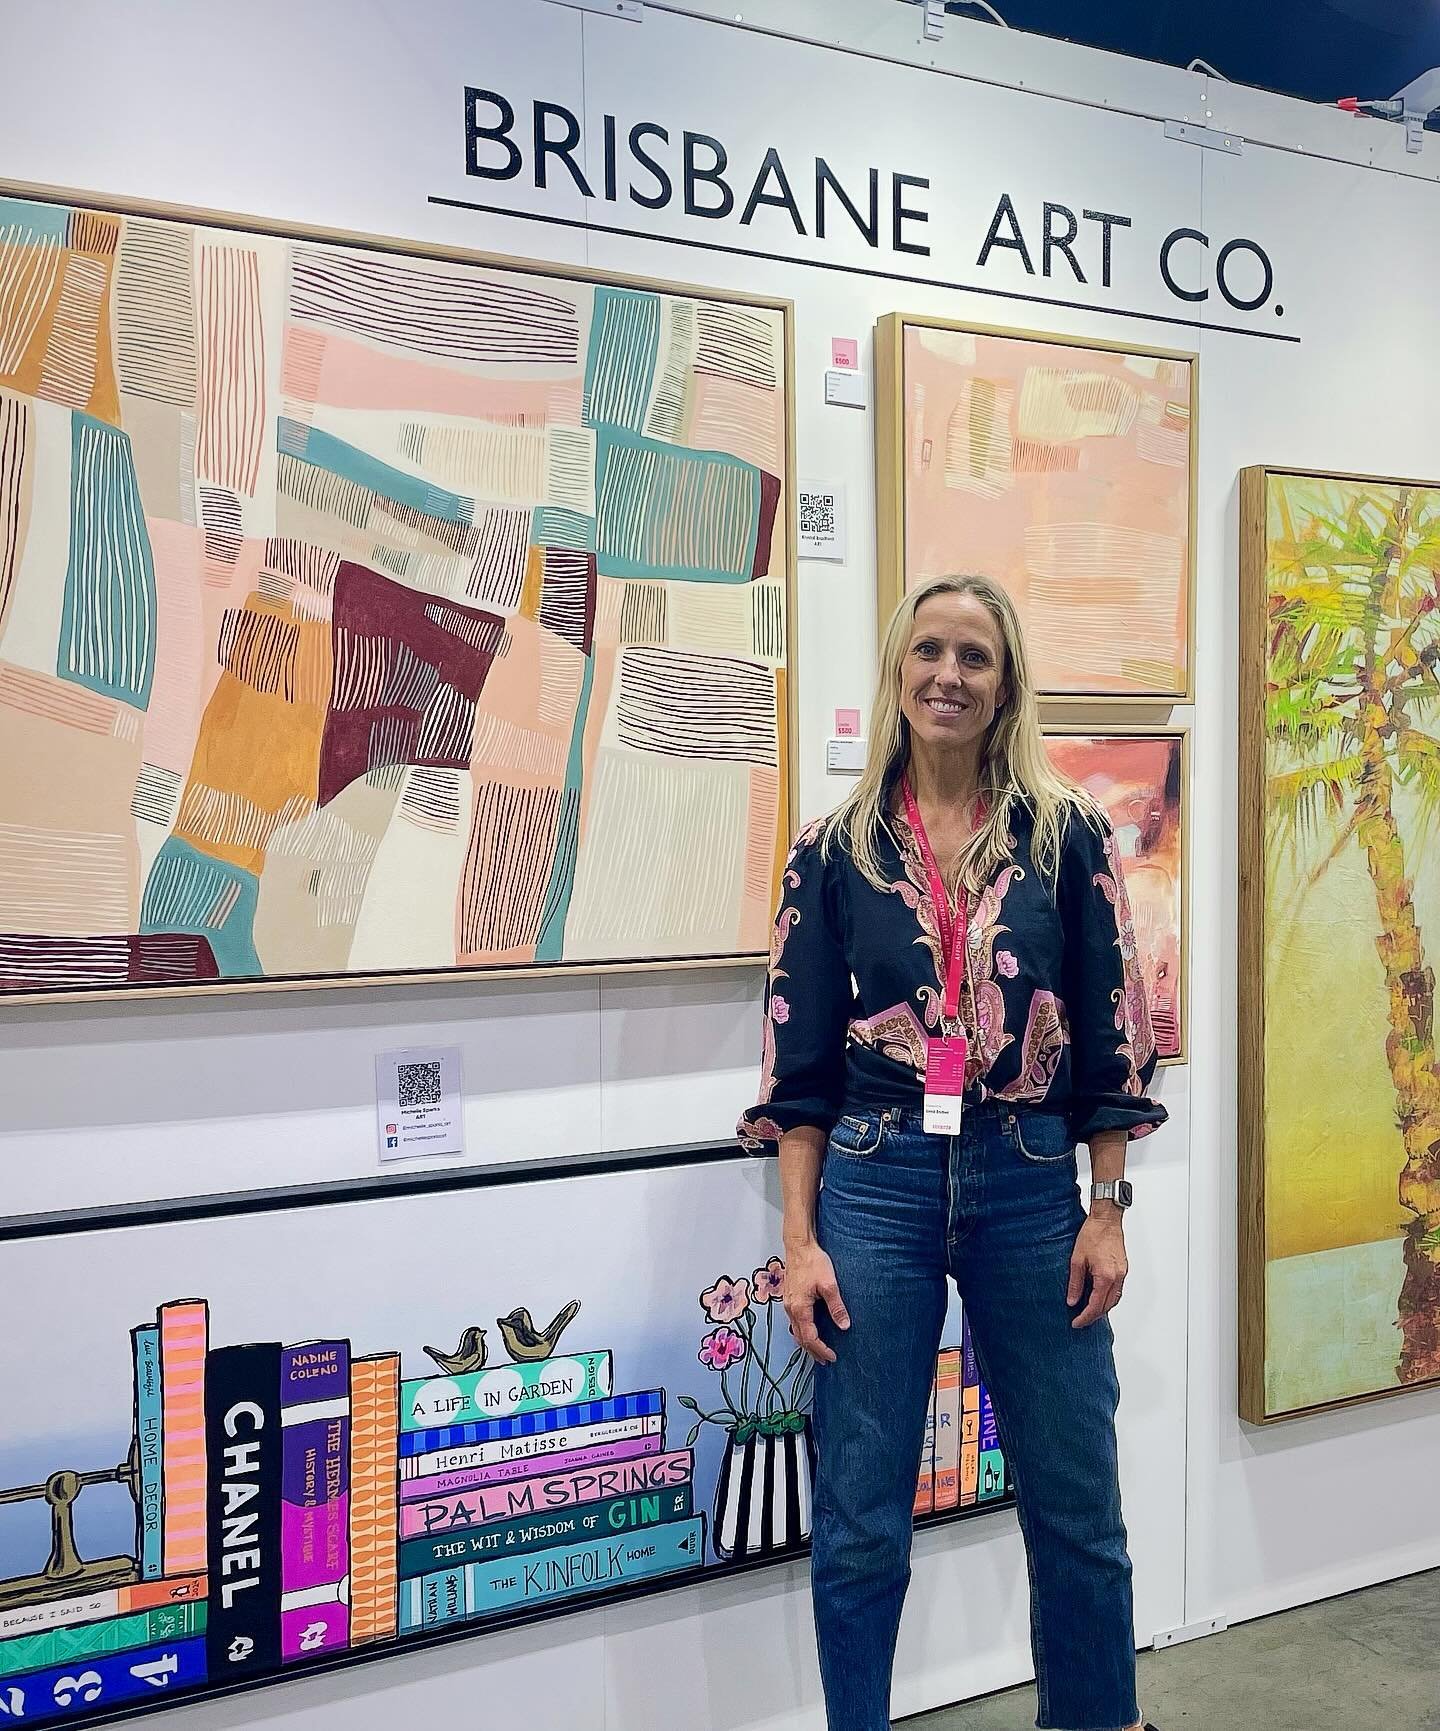 Day three 💛💫 

A beautiful Saturday ahead - love to see you! Come and find our collective in booth C5 @brisbaneartco with my amazing team and inspiration @michelle_sparks_art and @kerryrushtonart 💜

Today open until 5pm  xx